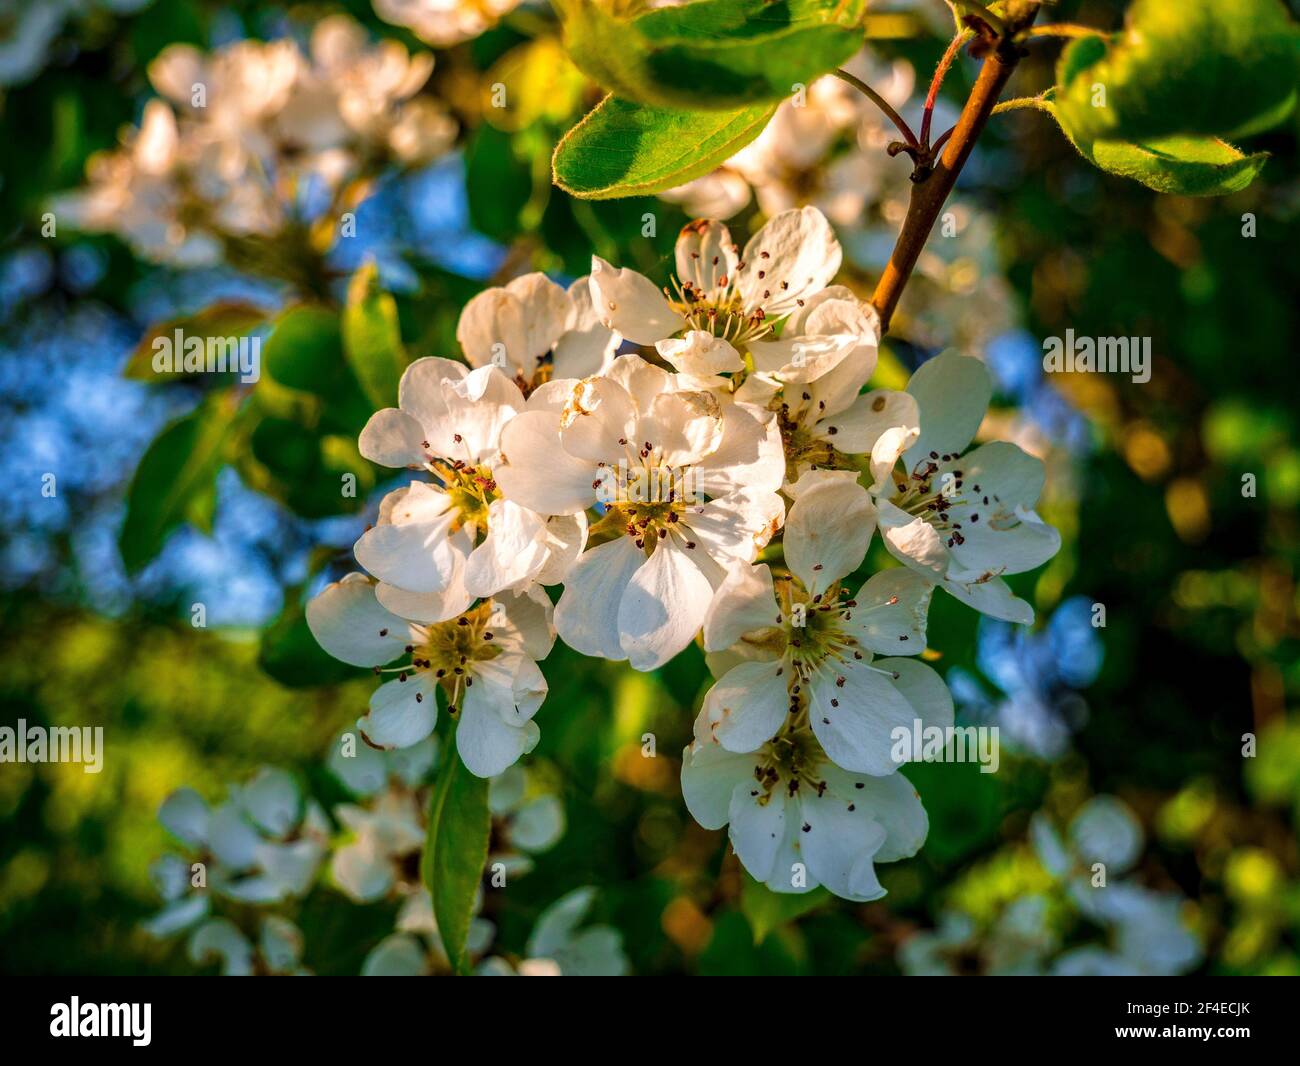 Close-up on wild pear(Pyrus pyraster) flowers Stock Photo